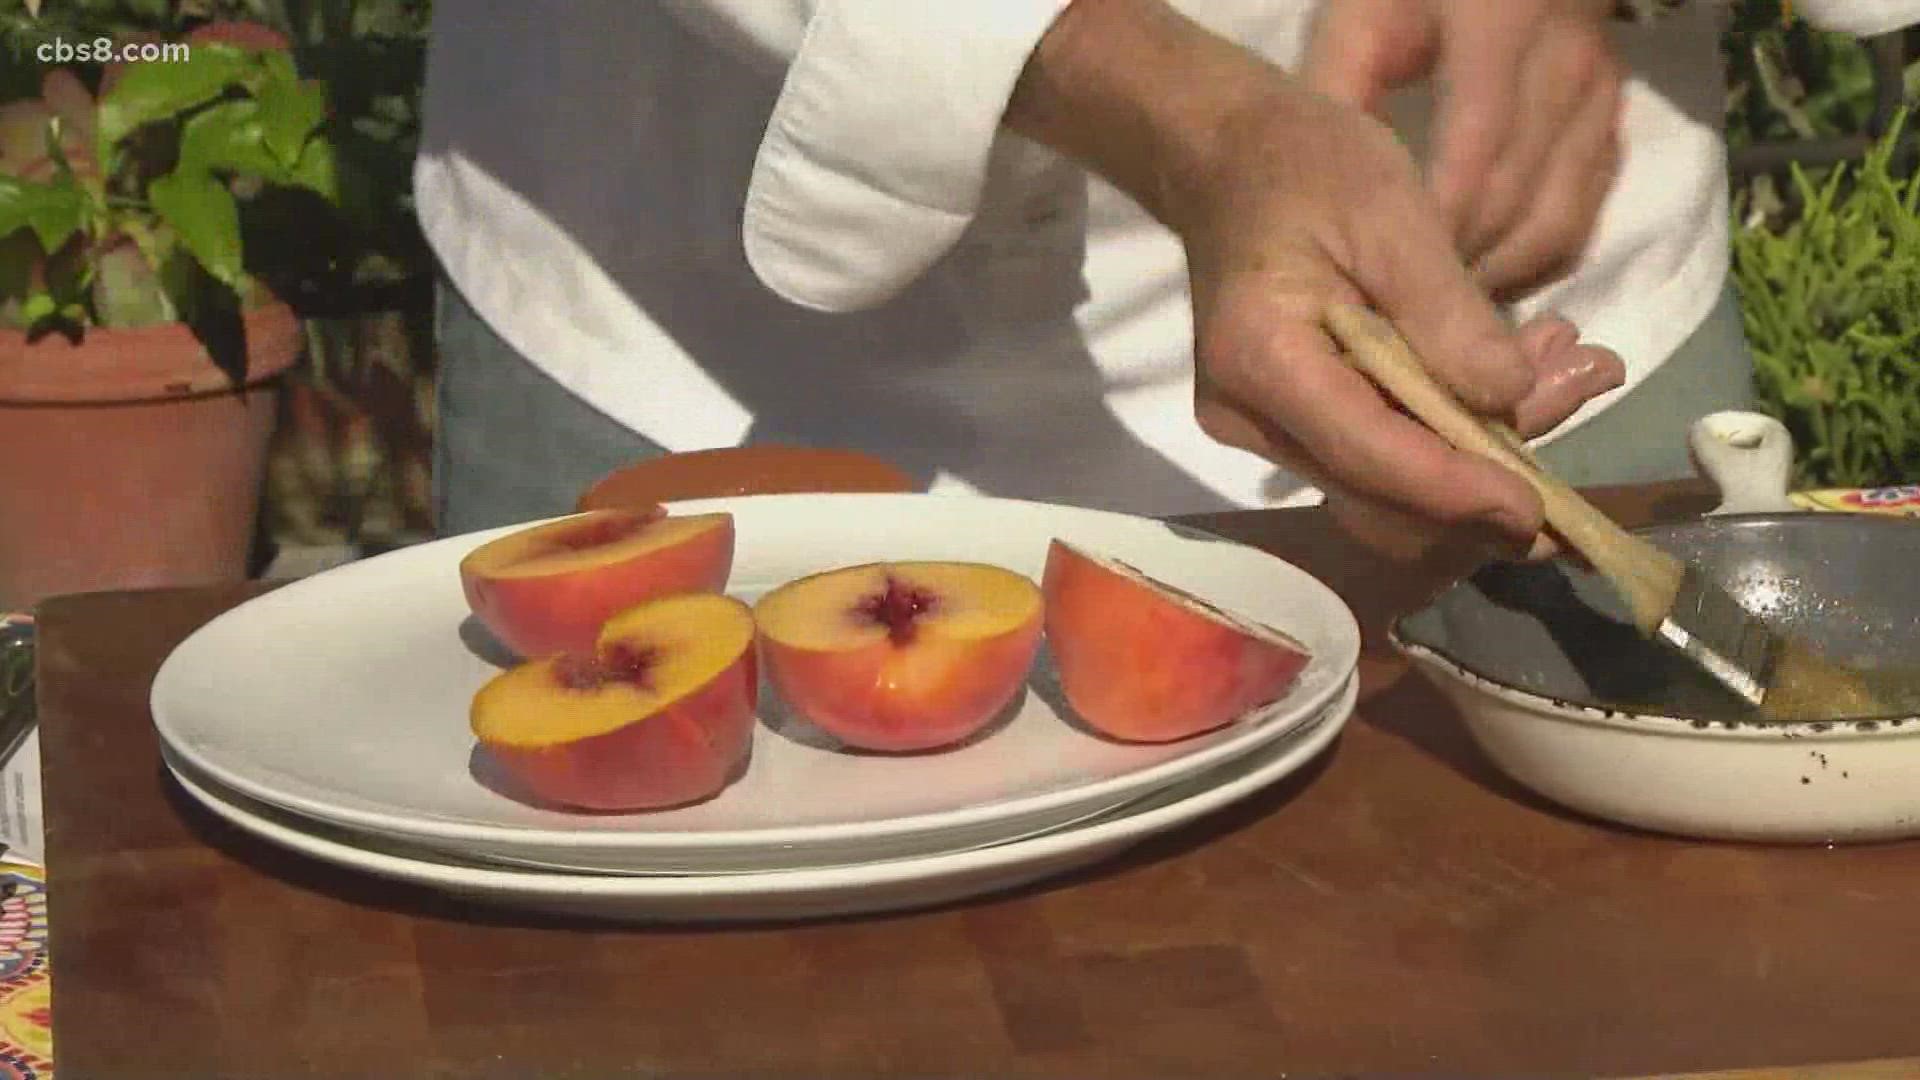 Dessert comes first on this Labor Day menu. Part one of how to prepare the grilled peach bread pudding.